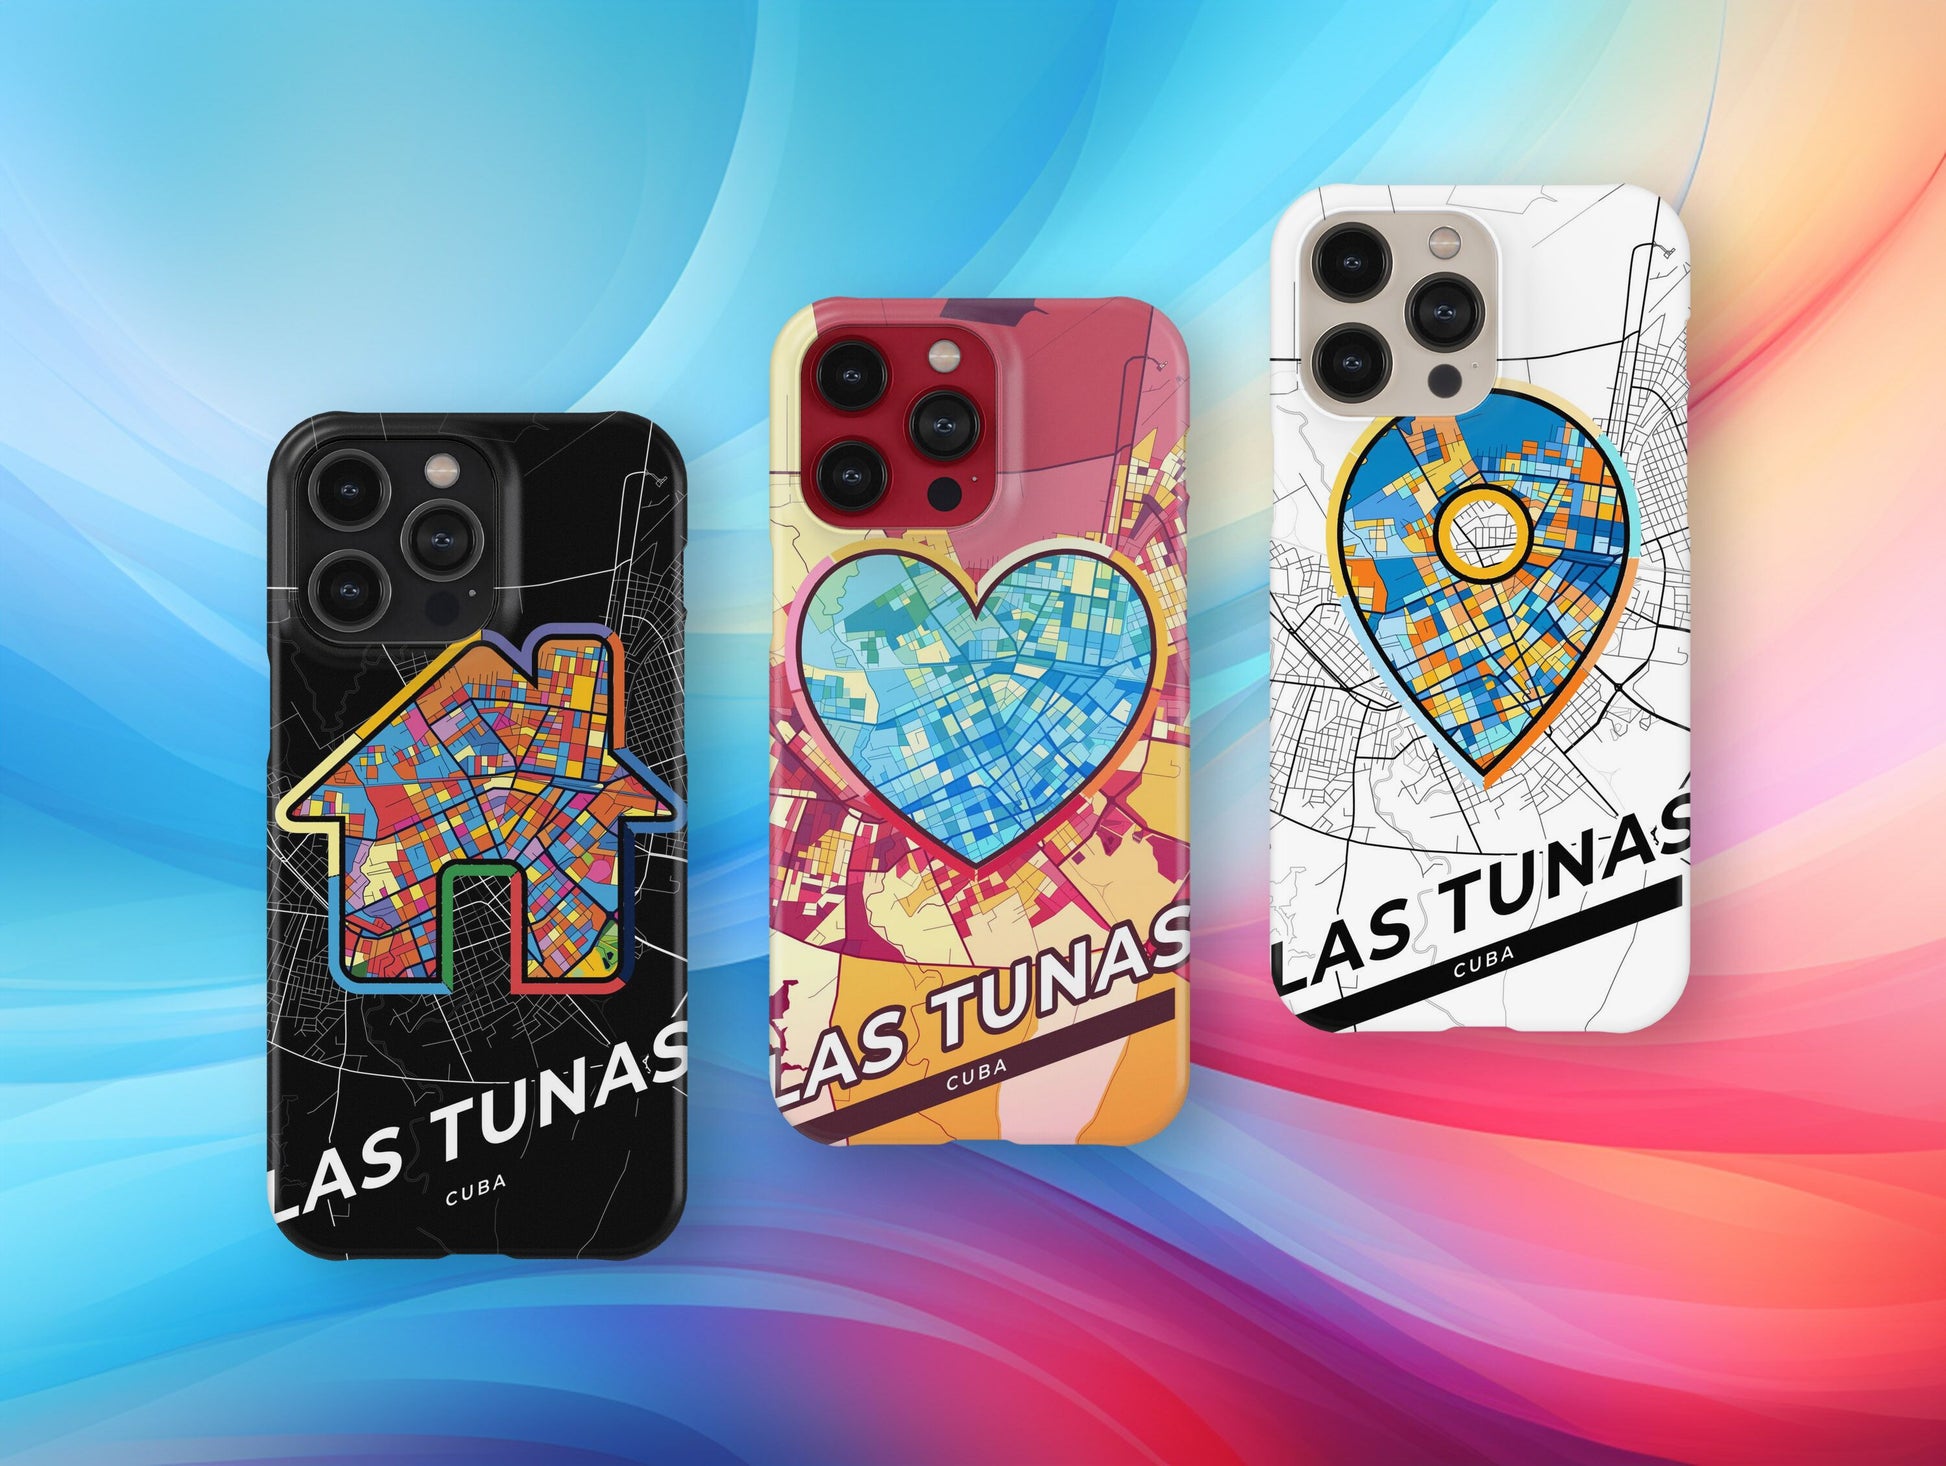 Las Tunas Cuba slim phone case with colorful icon. Birthday, wedding or housewarming gift. Couple match cases.